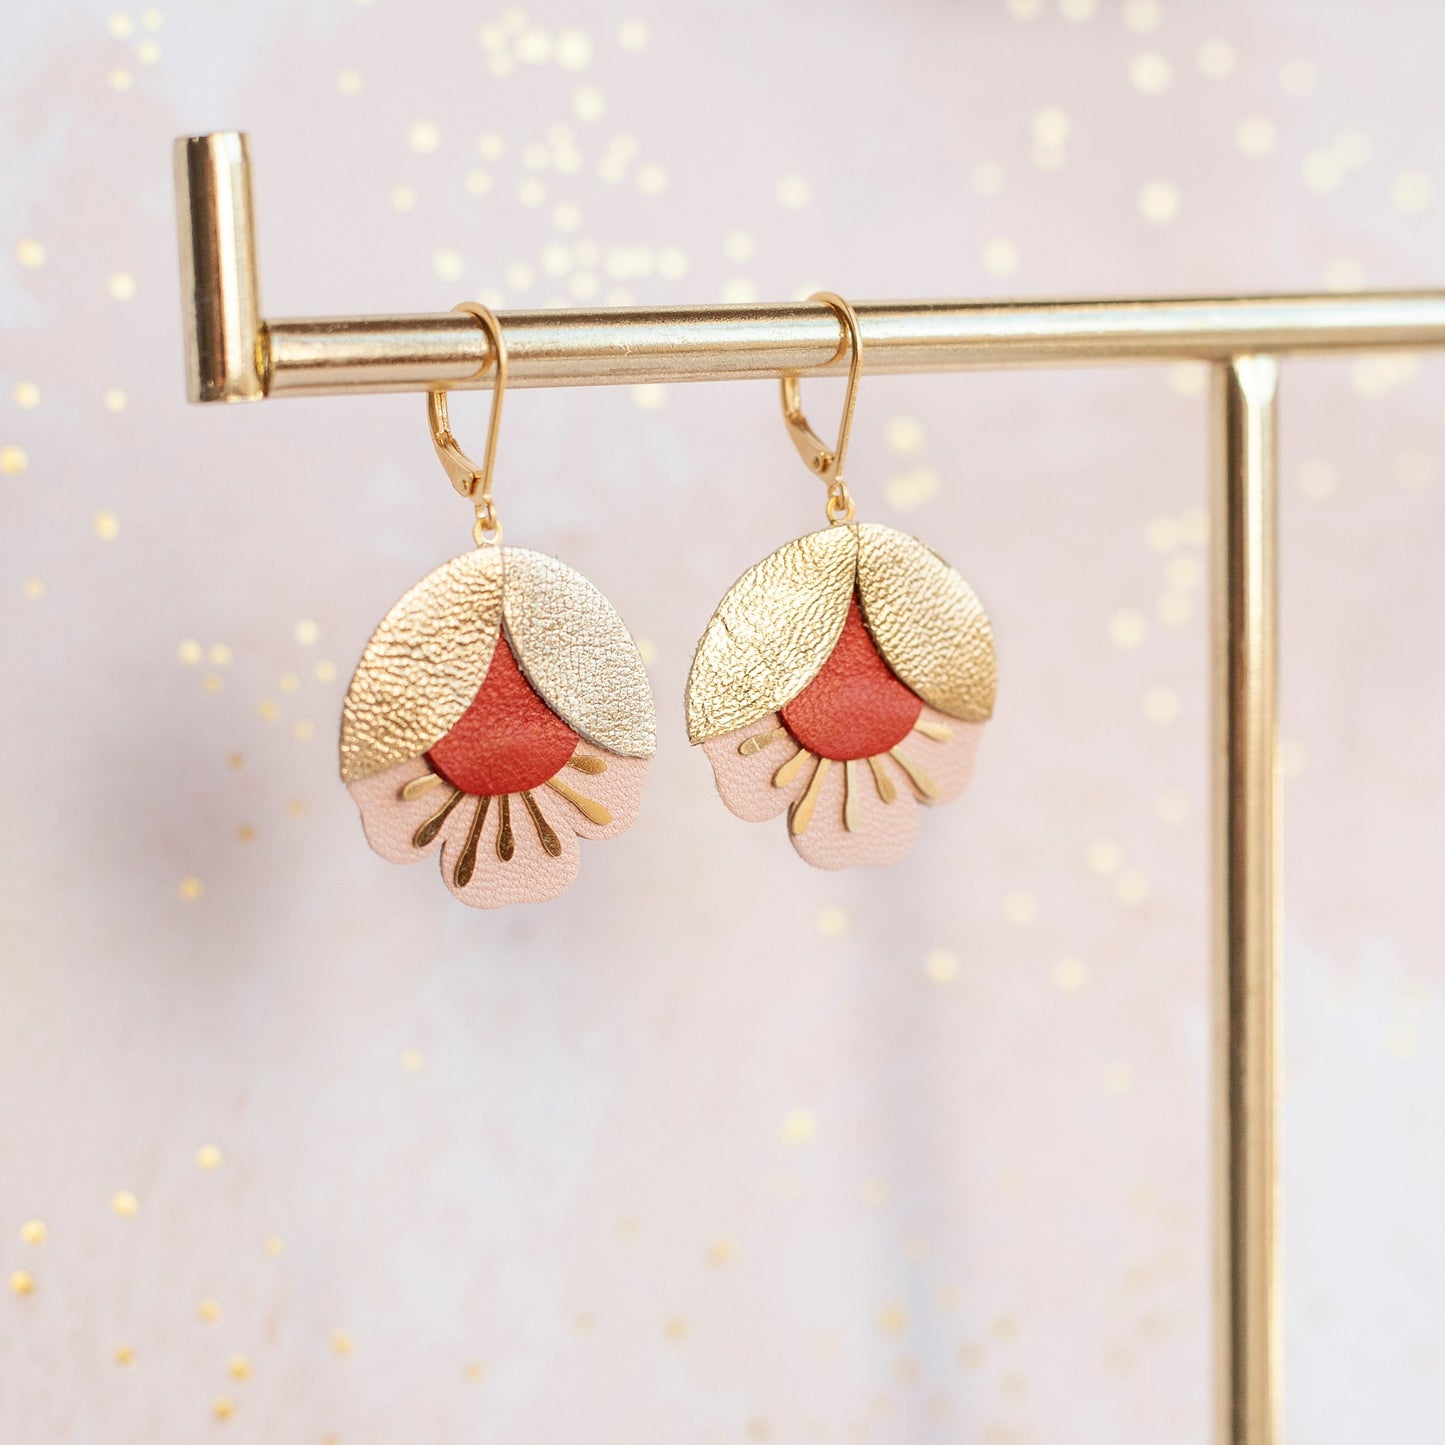 Cherry blossom earrings in red and pink gold leather